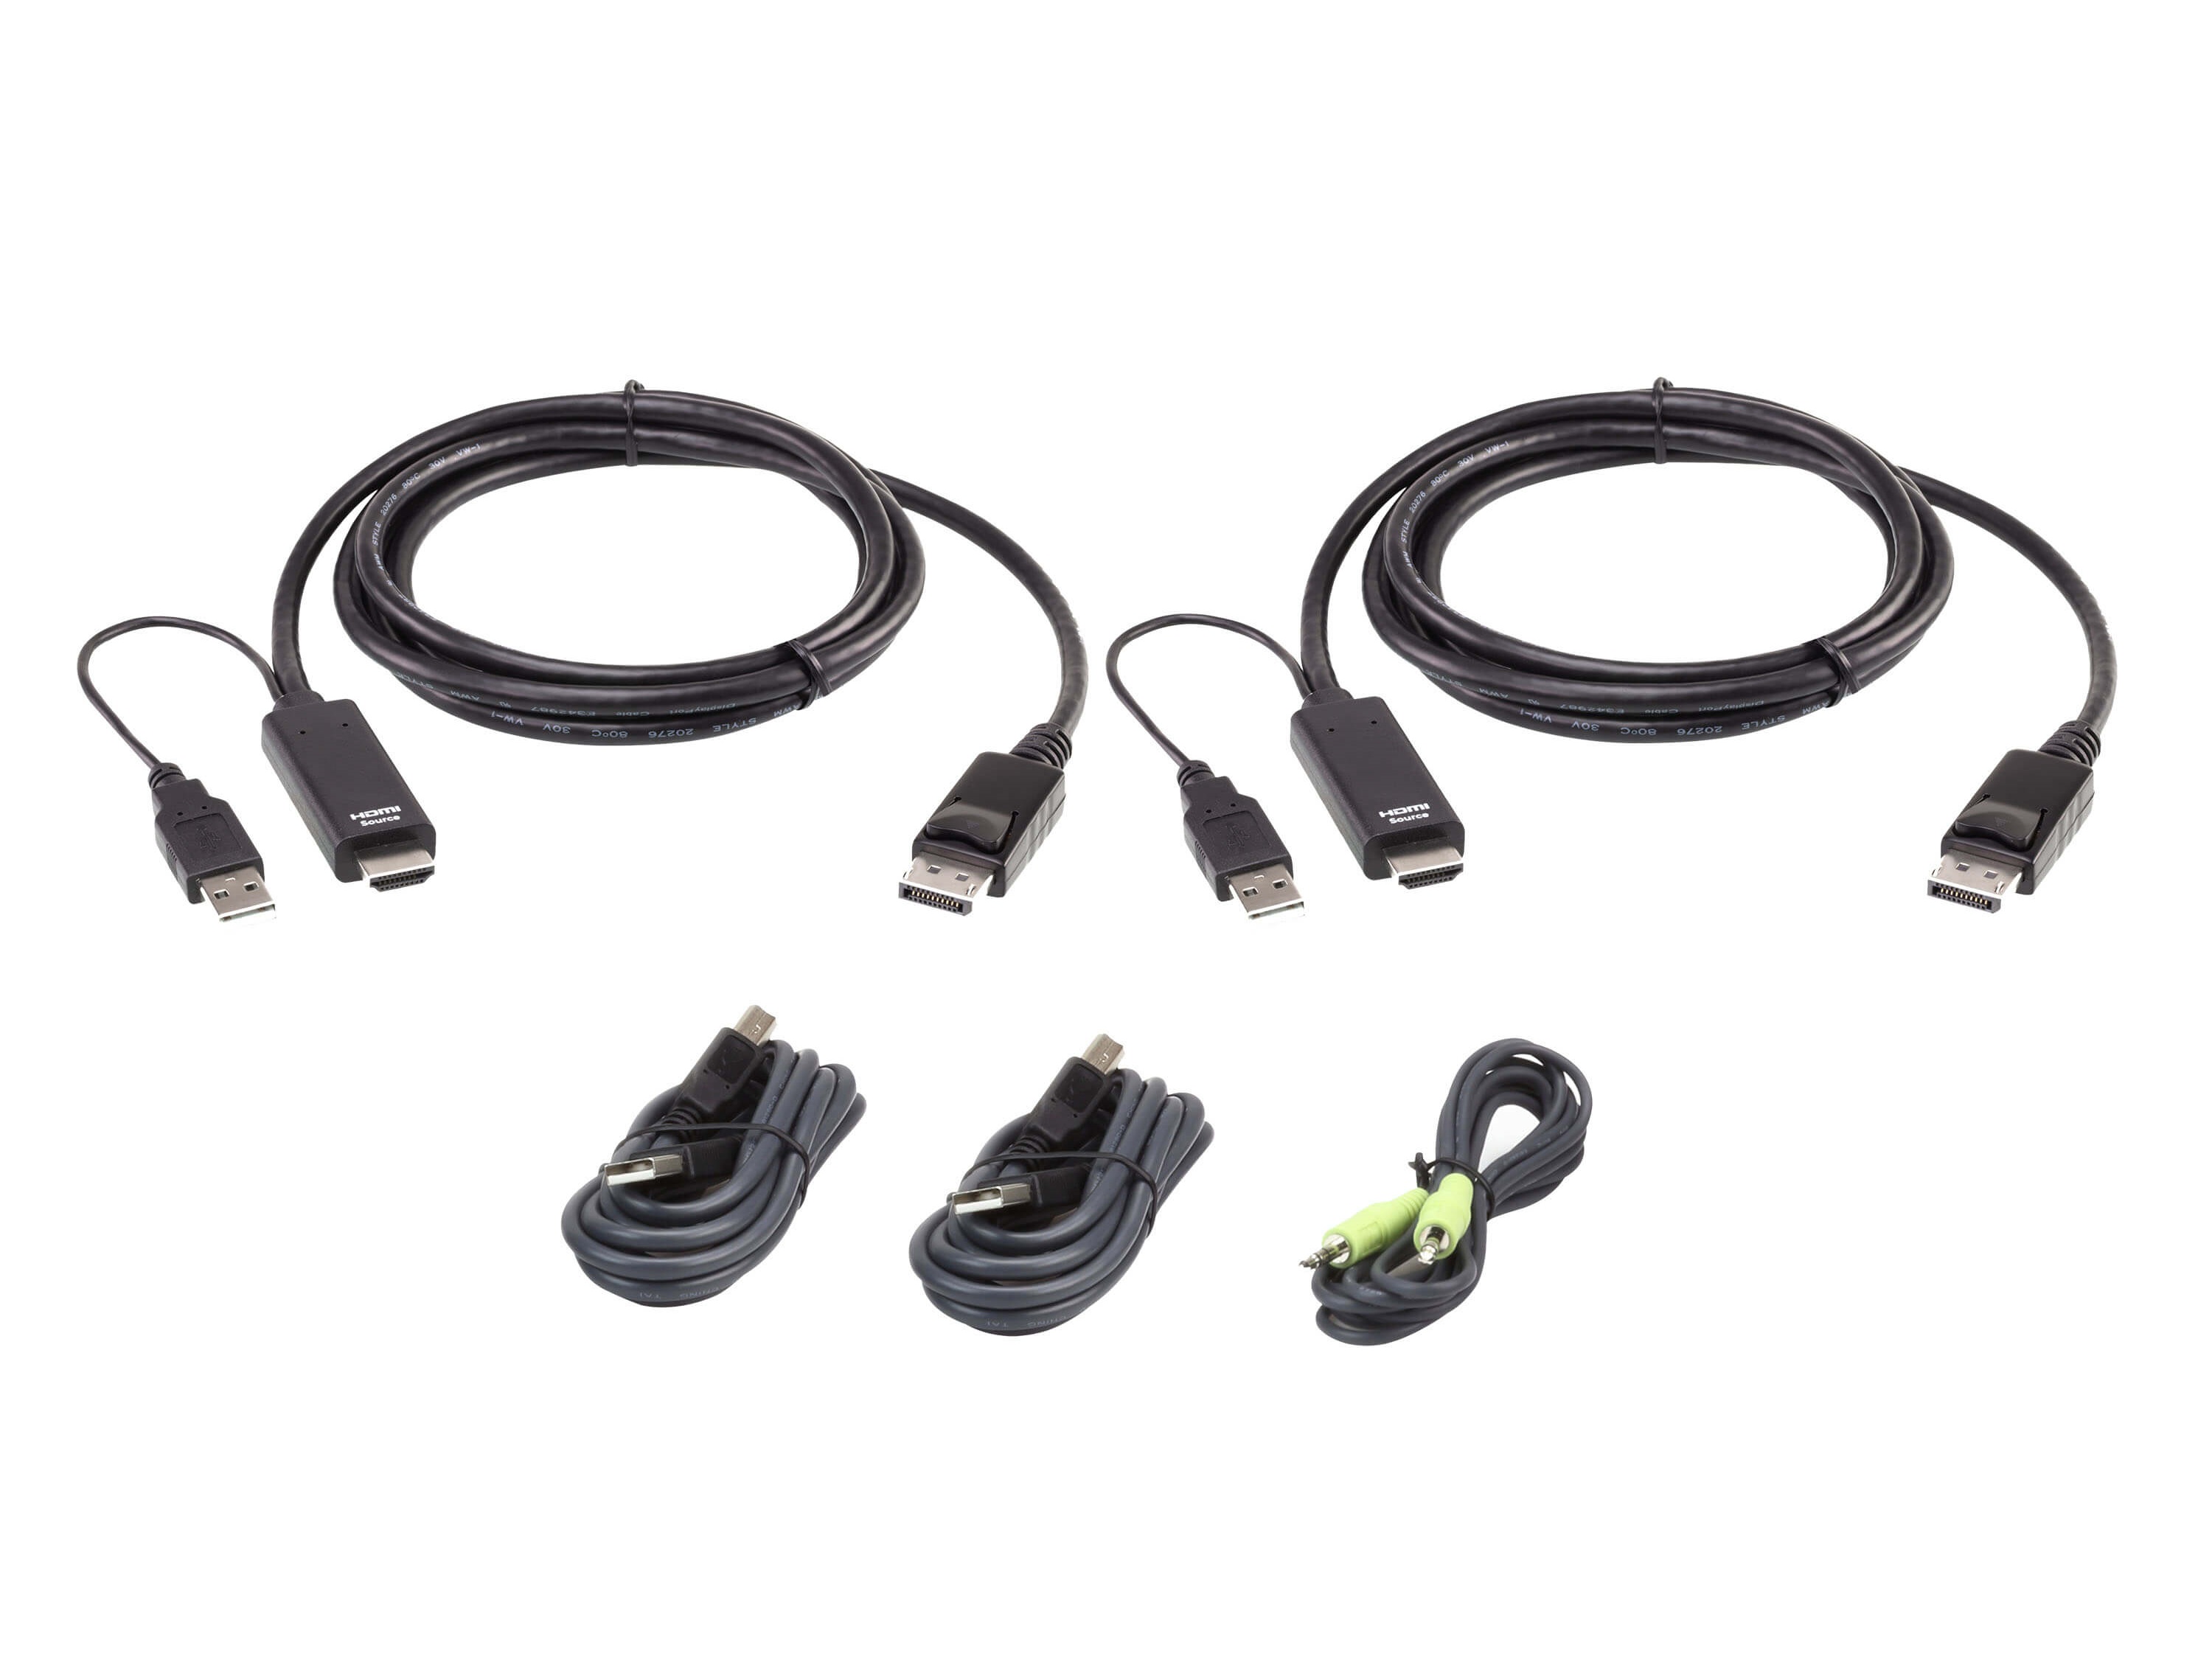 2L7D02UHDPX5 1.8m USB Universal Dual Display Secure KVM Cable Kit by Aten